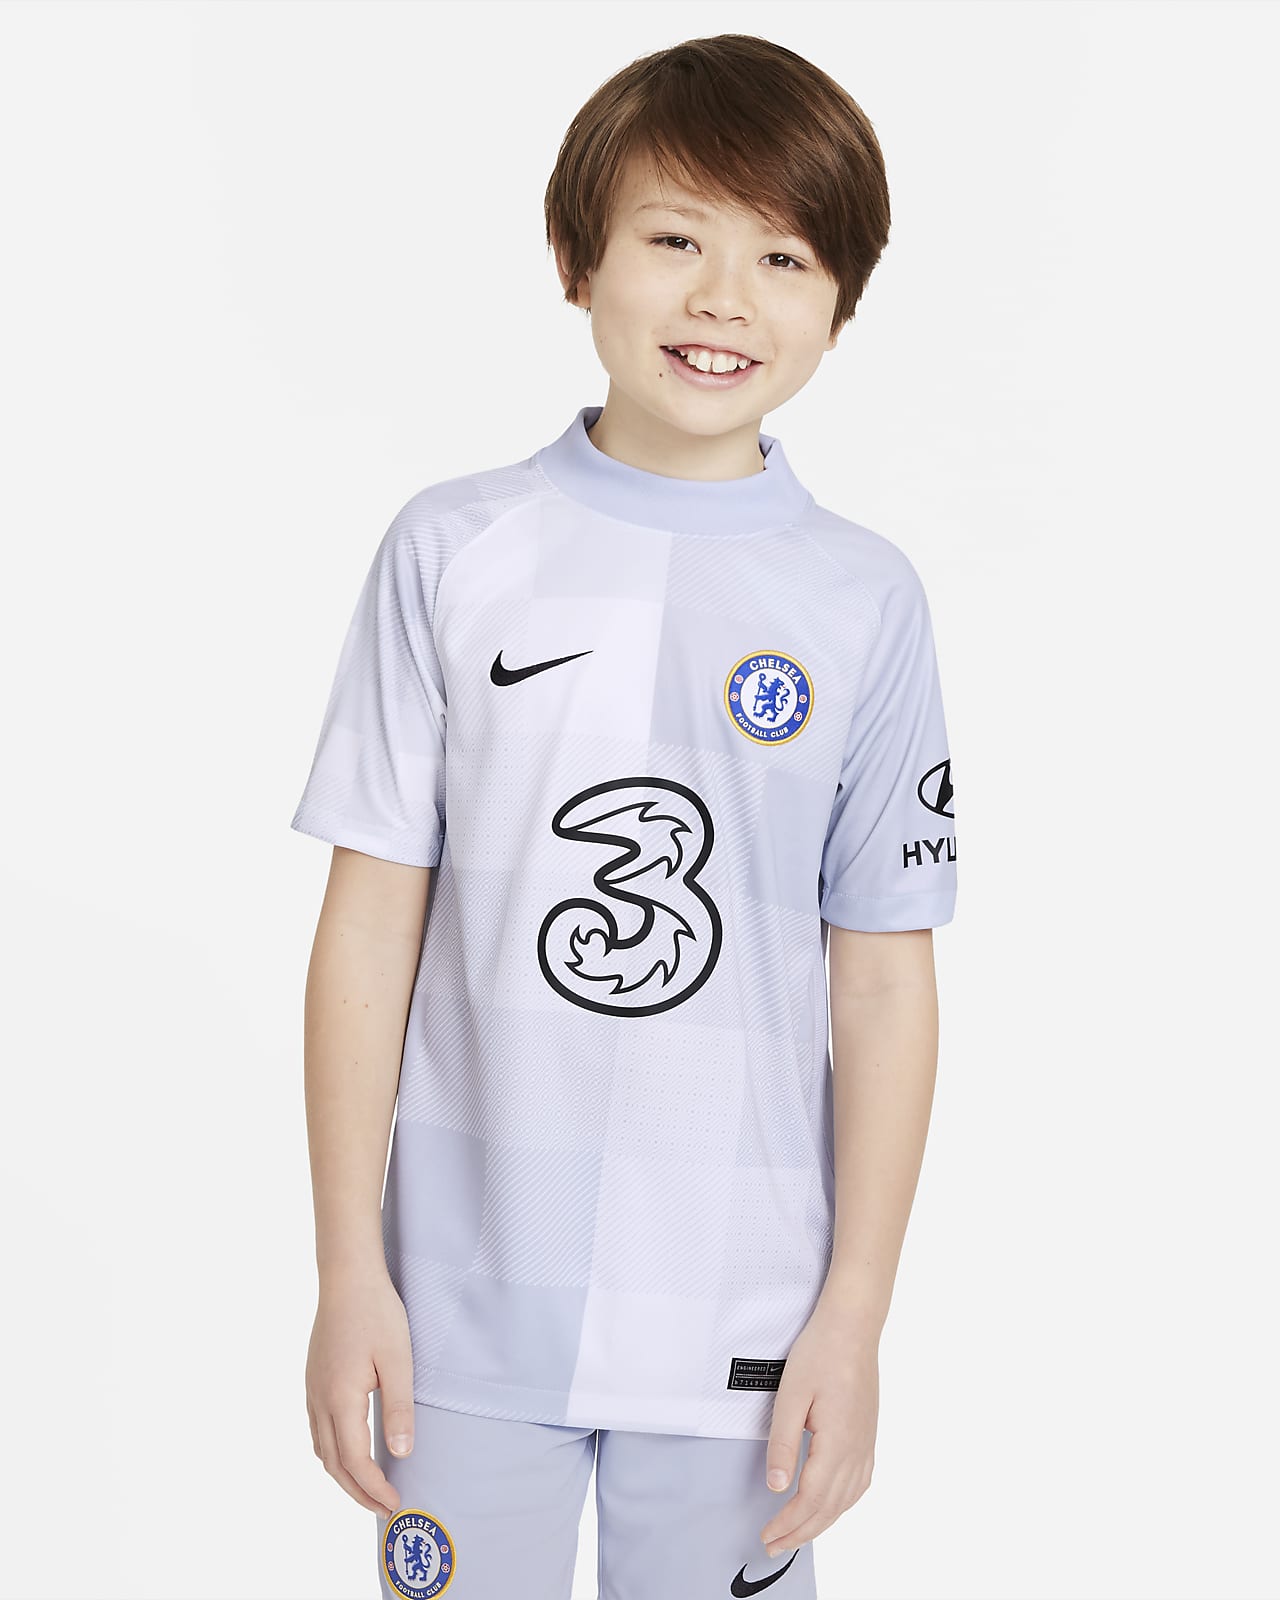 Chelsea FC Official Soccer Gift Boys Kids Baby Pajamas 